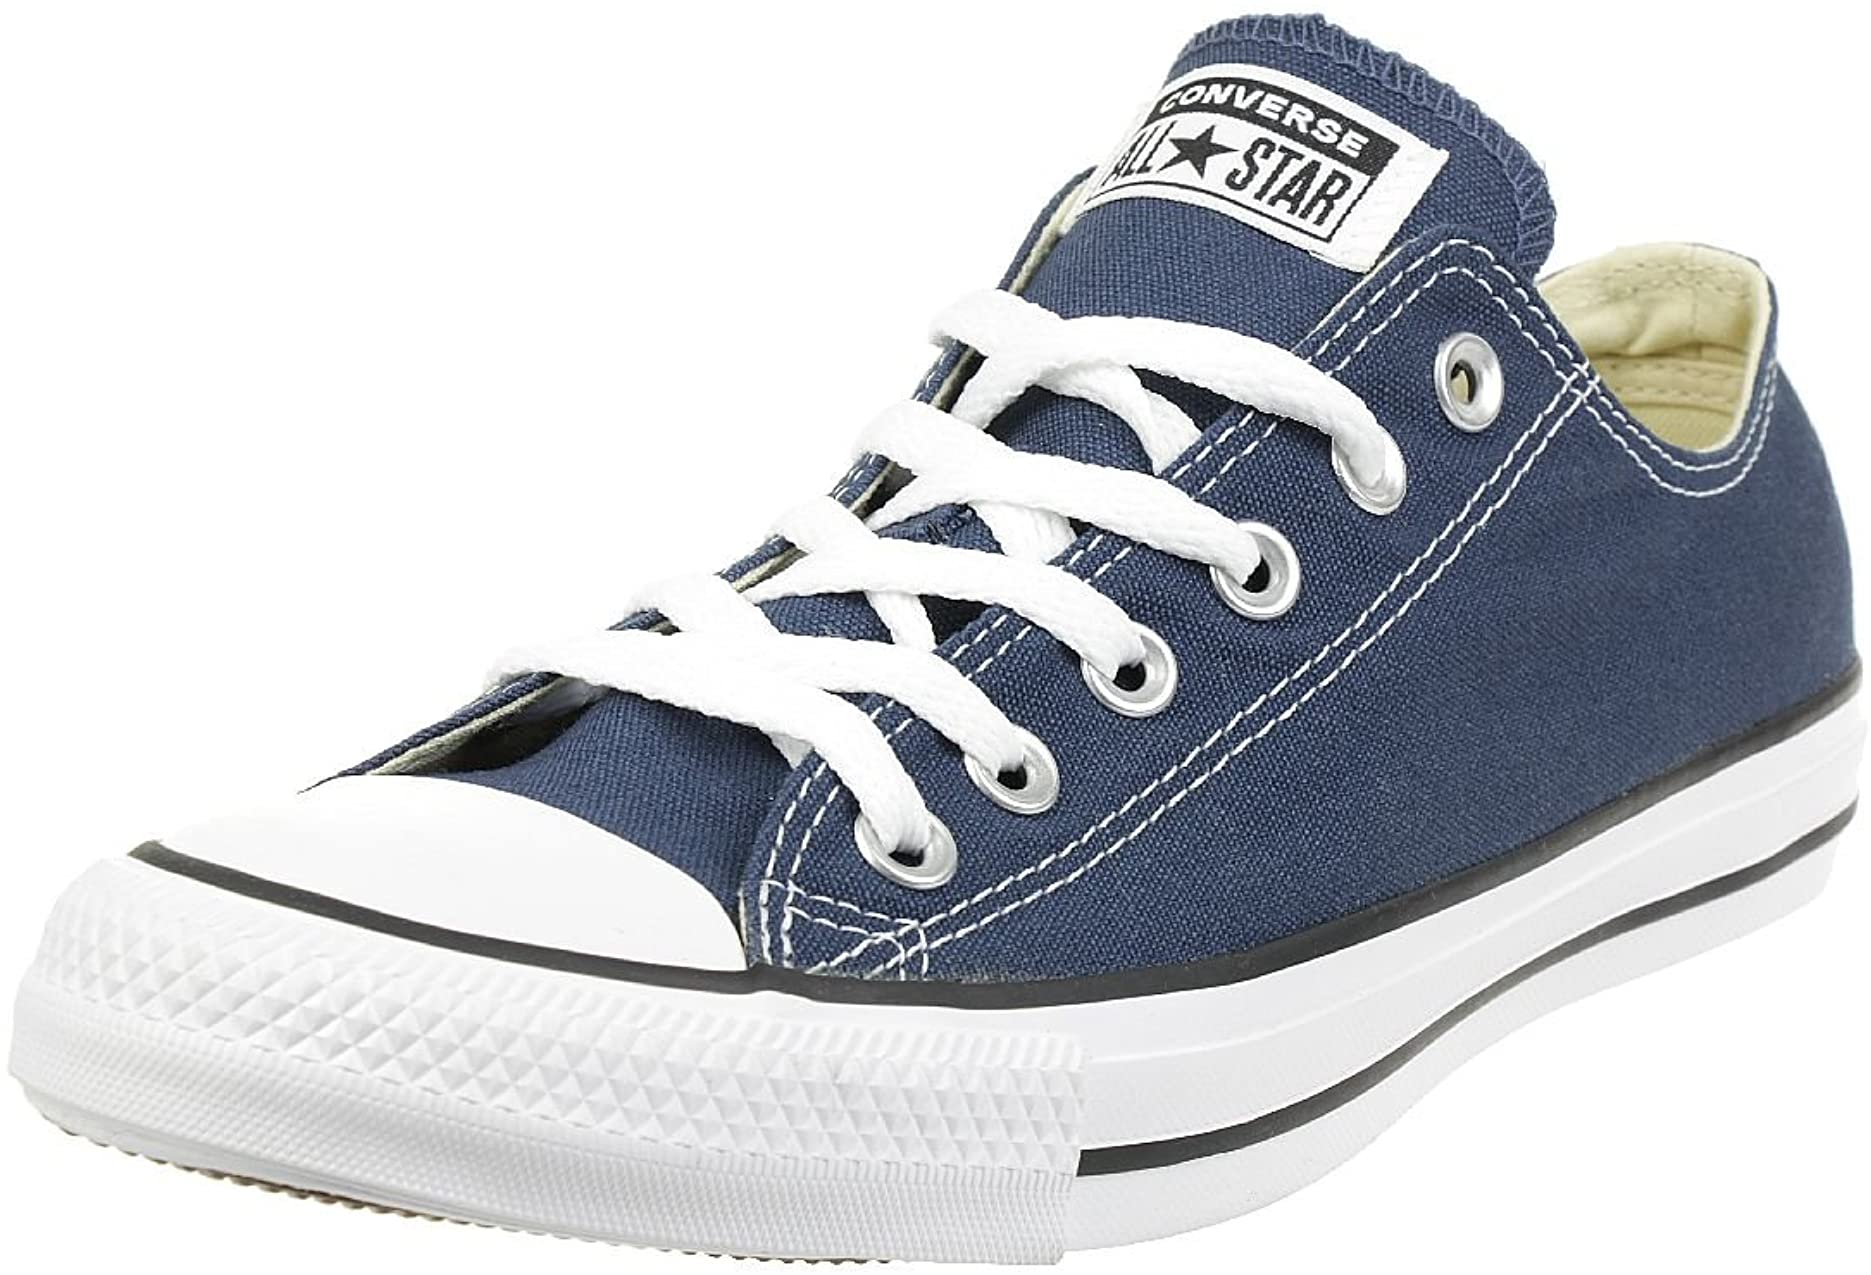 Converse Chuck Taylor All Star Low Top Ox Unisex Sneakers - Navy - 8M/10W